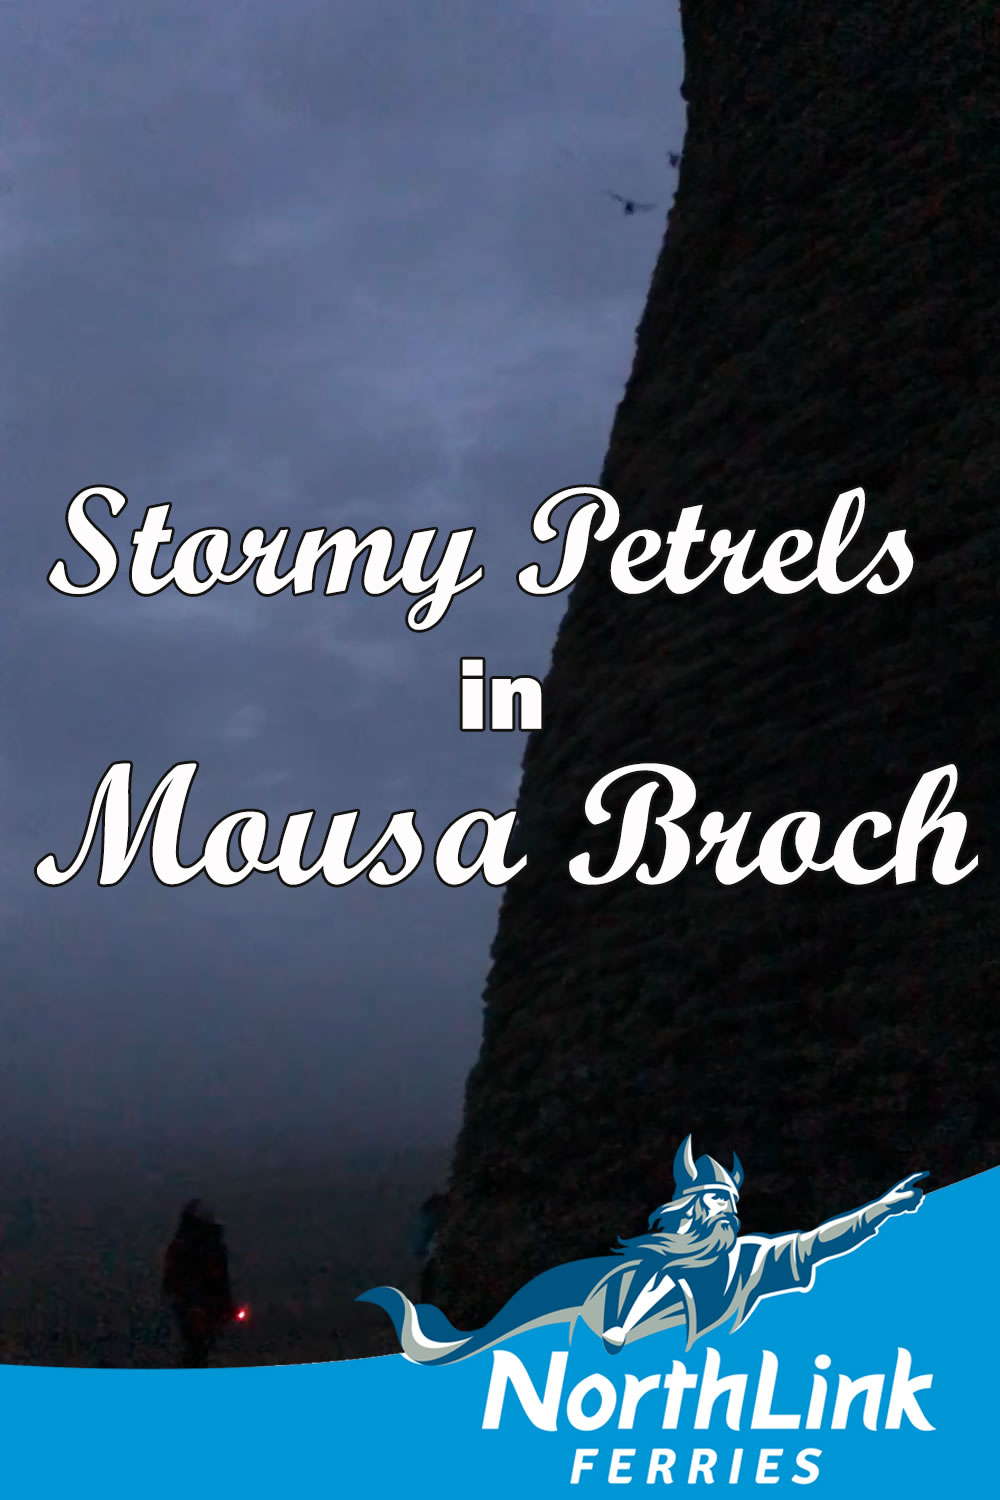 Stormy Petrels in Mousa Broch